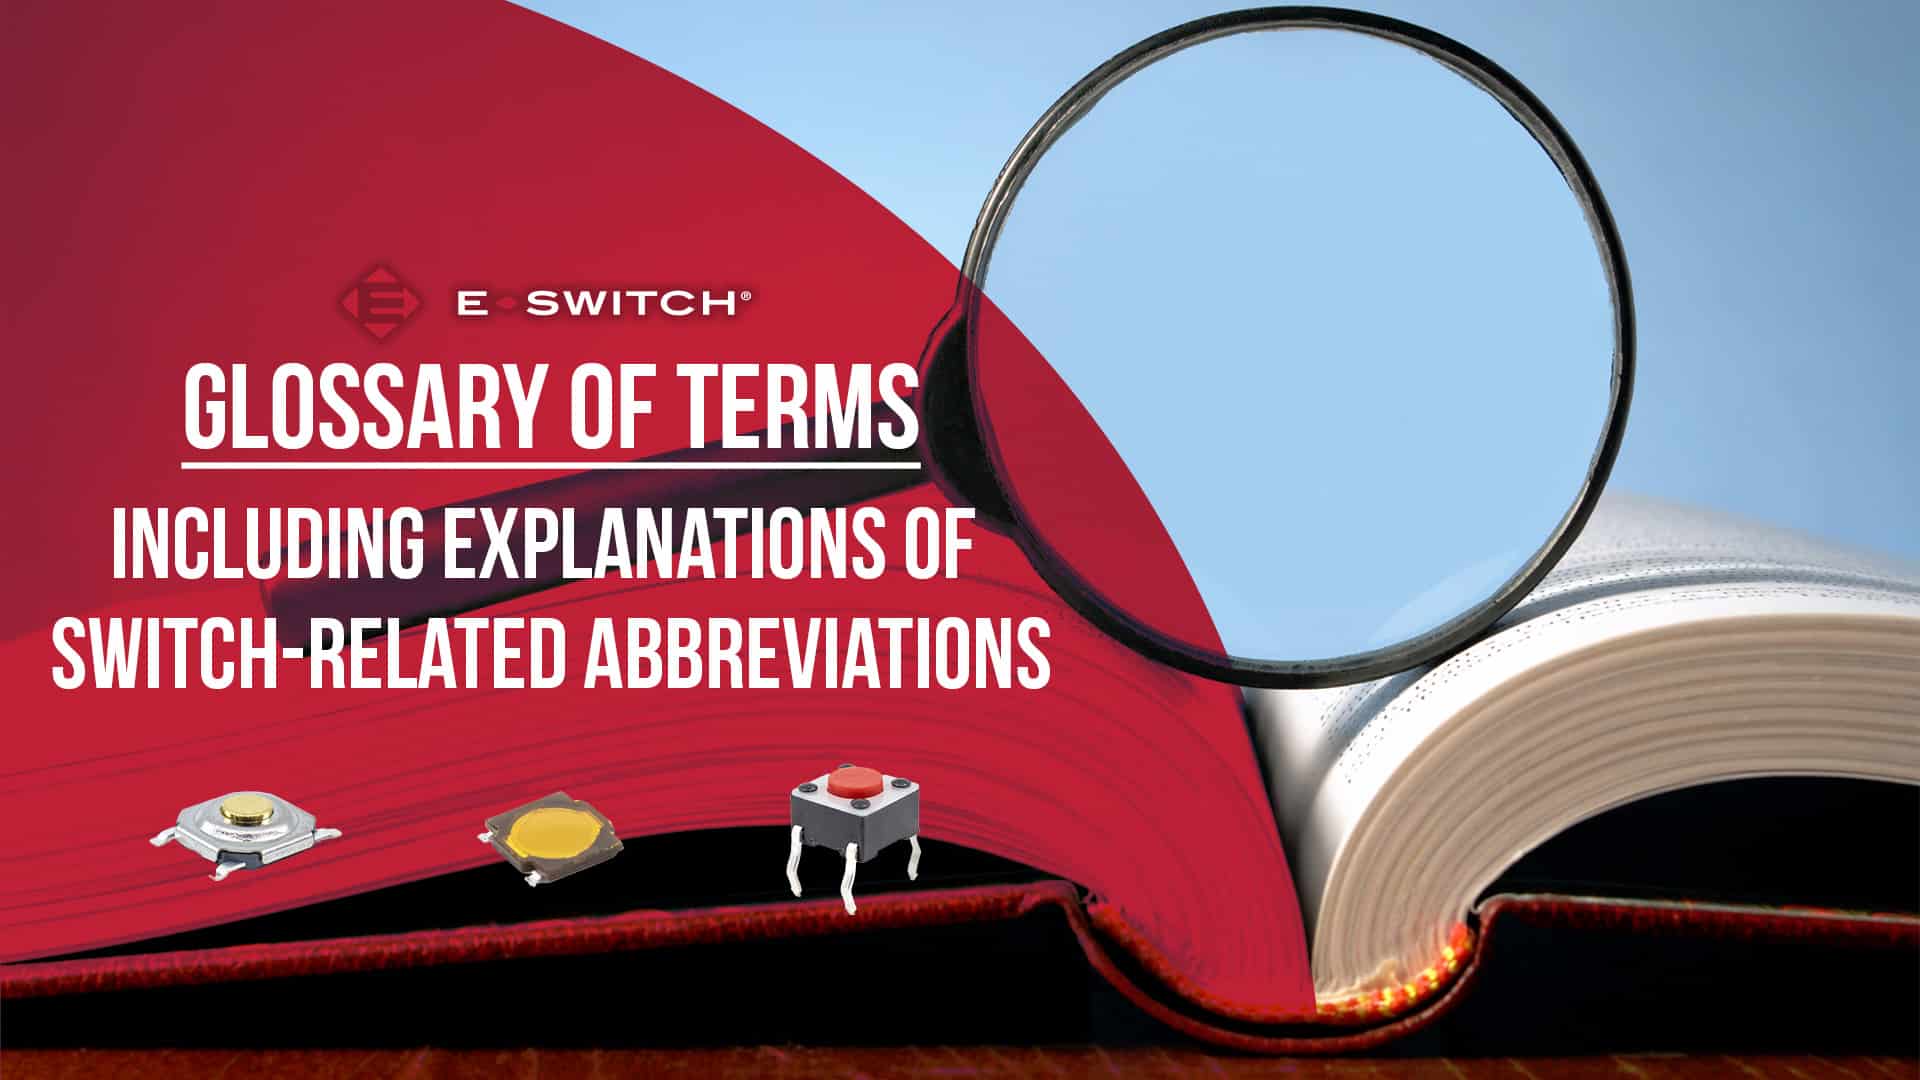 Glossary Of Terms and Switch-related Abbreviations